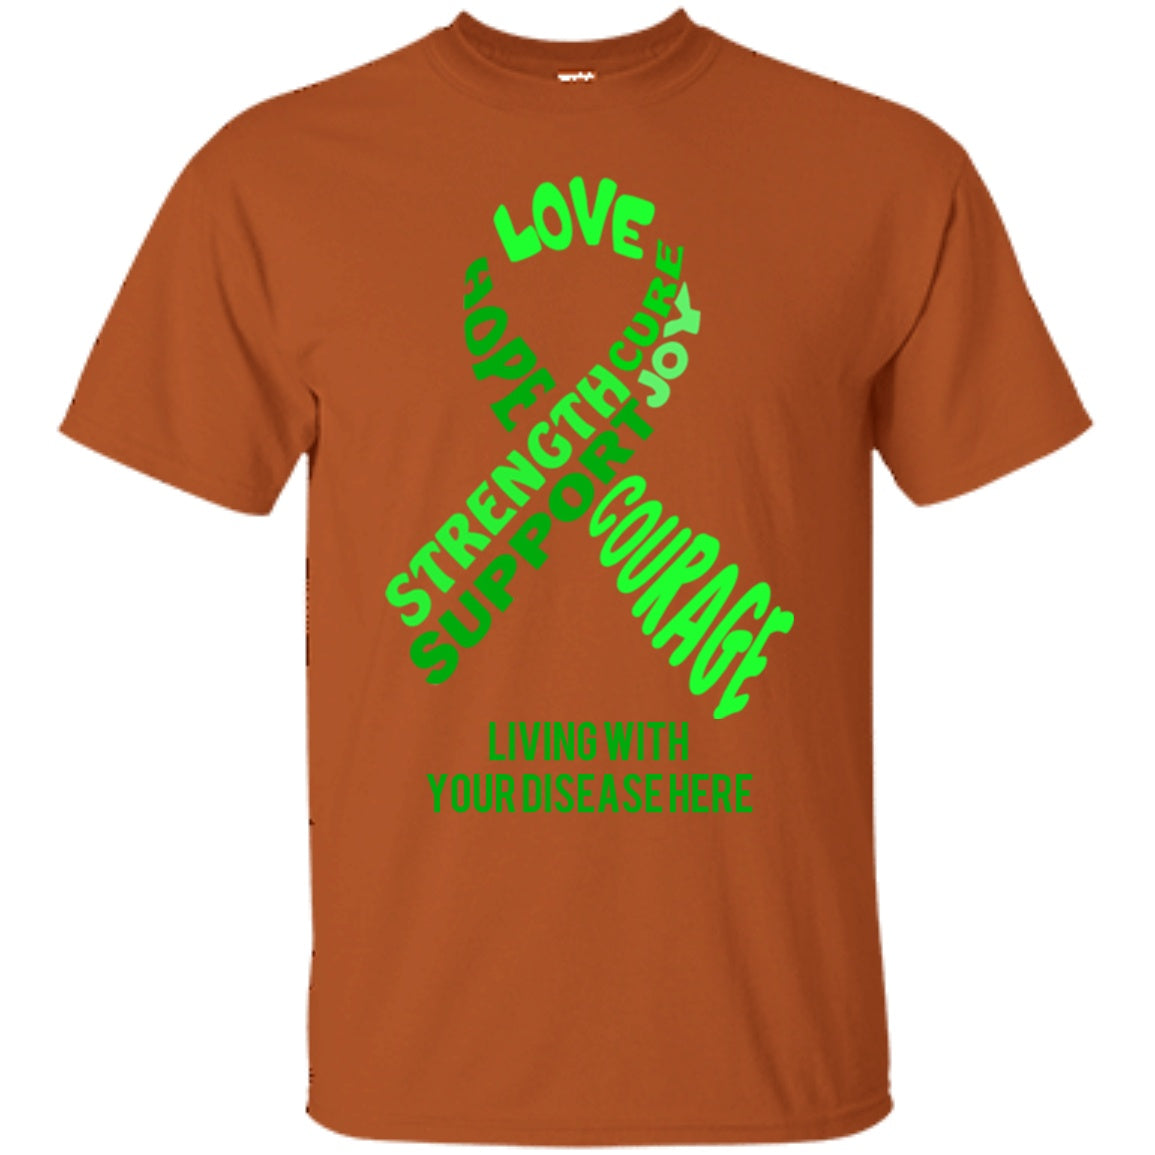 Customisable Green Awareness Ribbon With Words Unisex Shirt - The Unchargeables